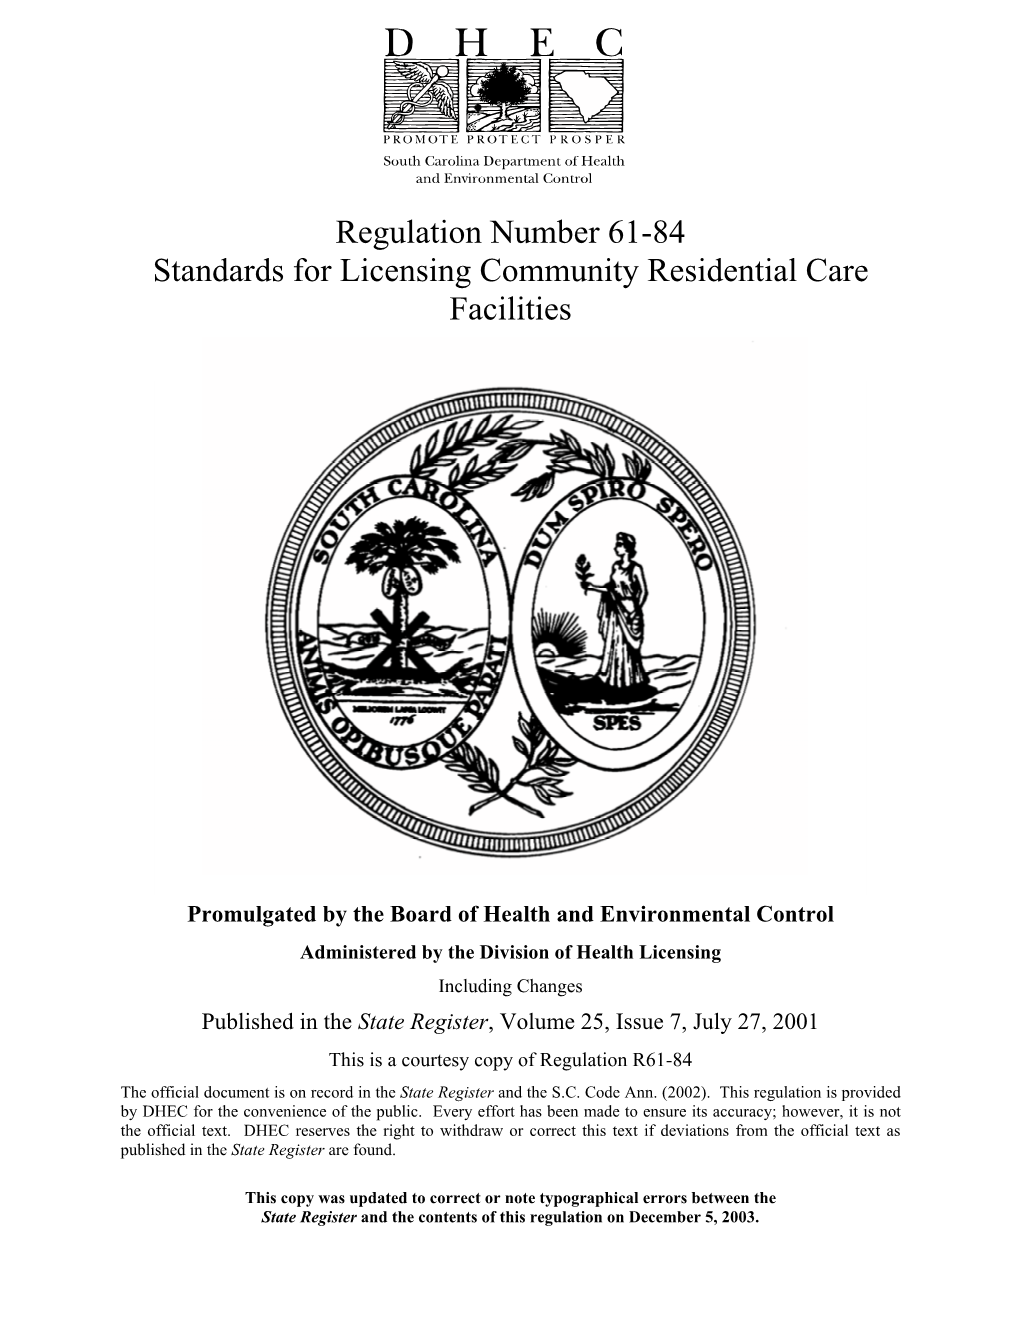 Regulation Number 61-84 Standards for Licensing Community Residential Care Facilities